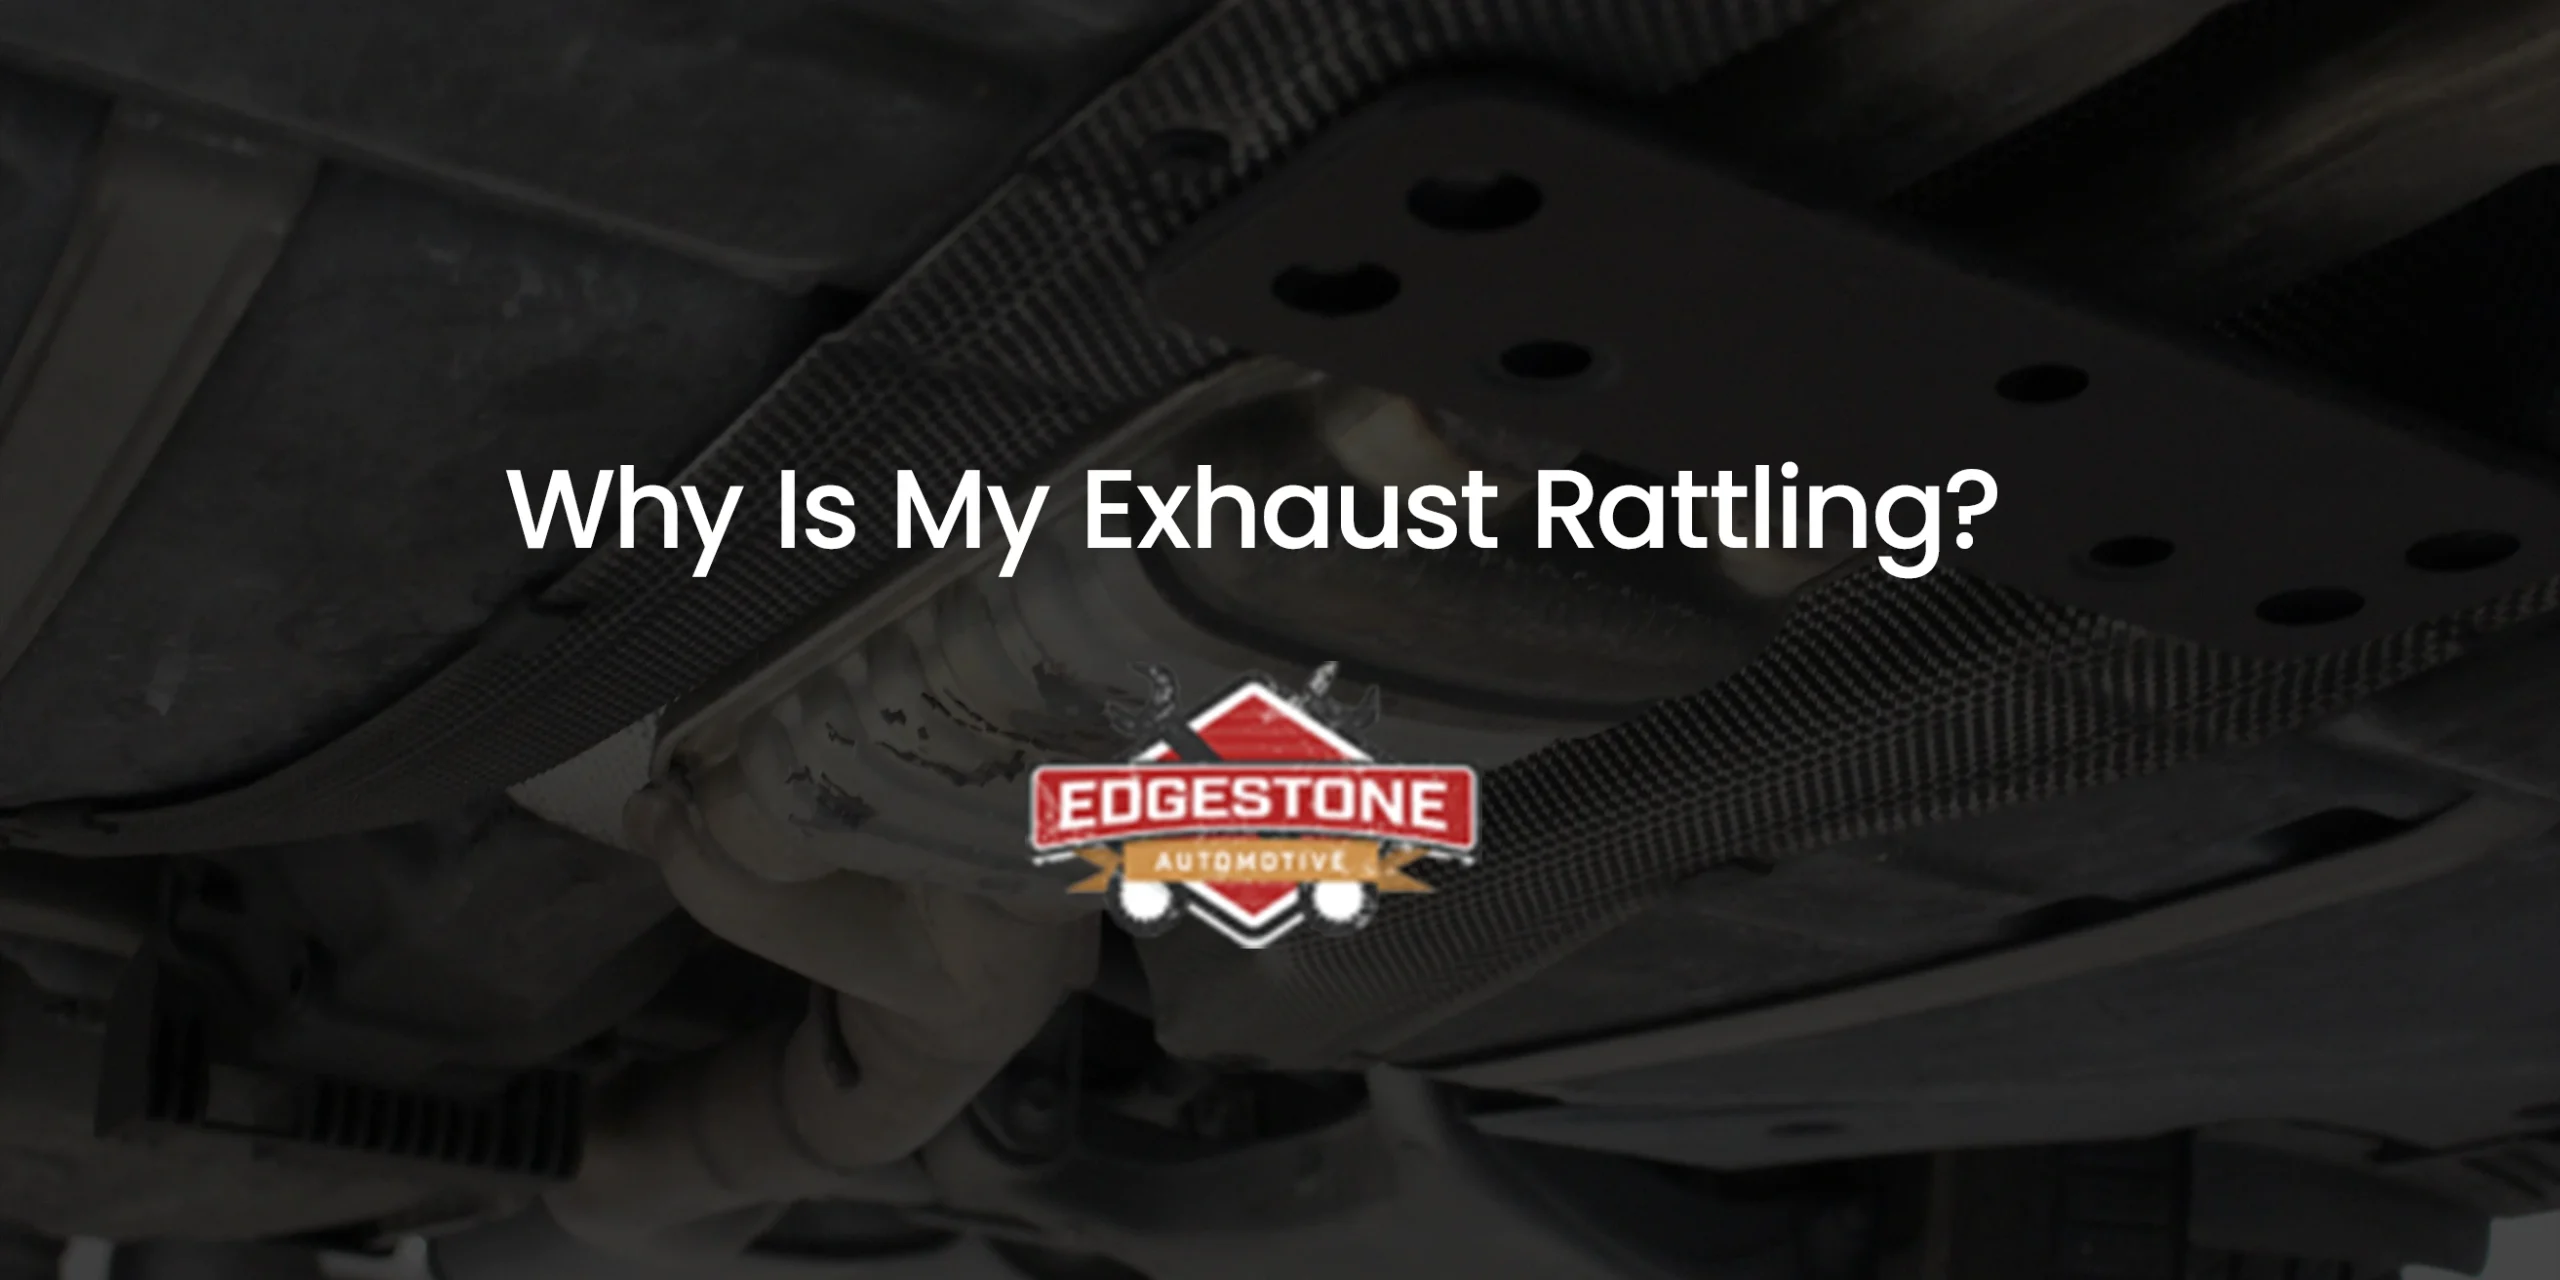 Why Is My Exhaust Rattling?